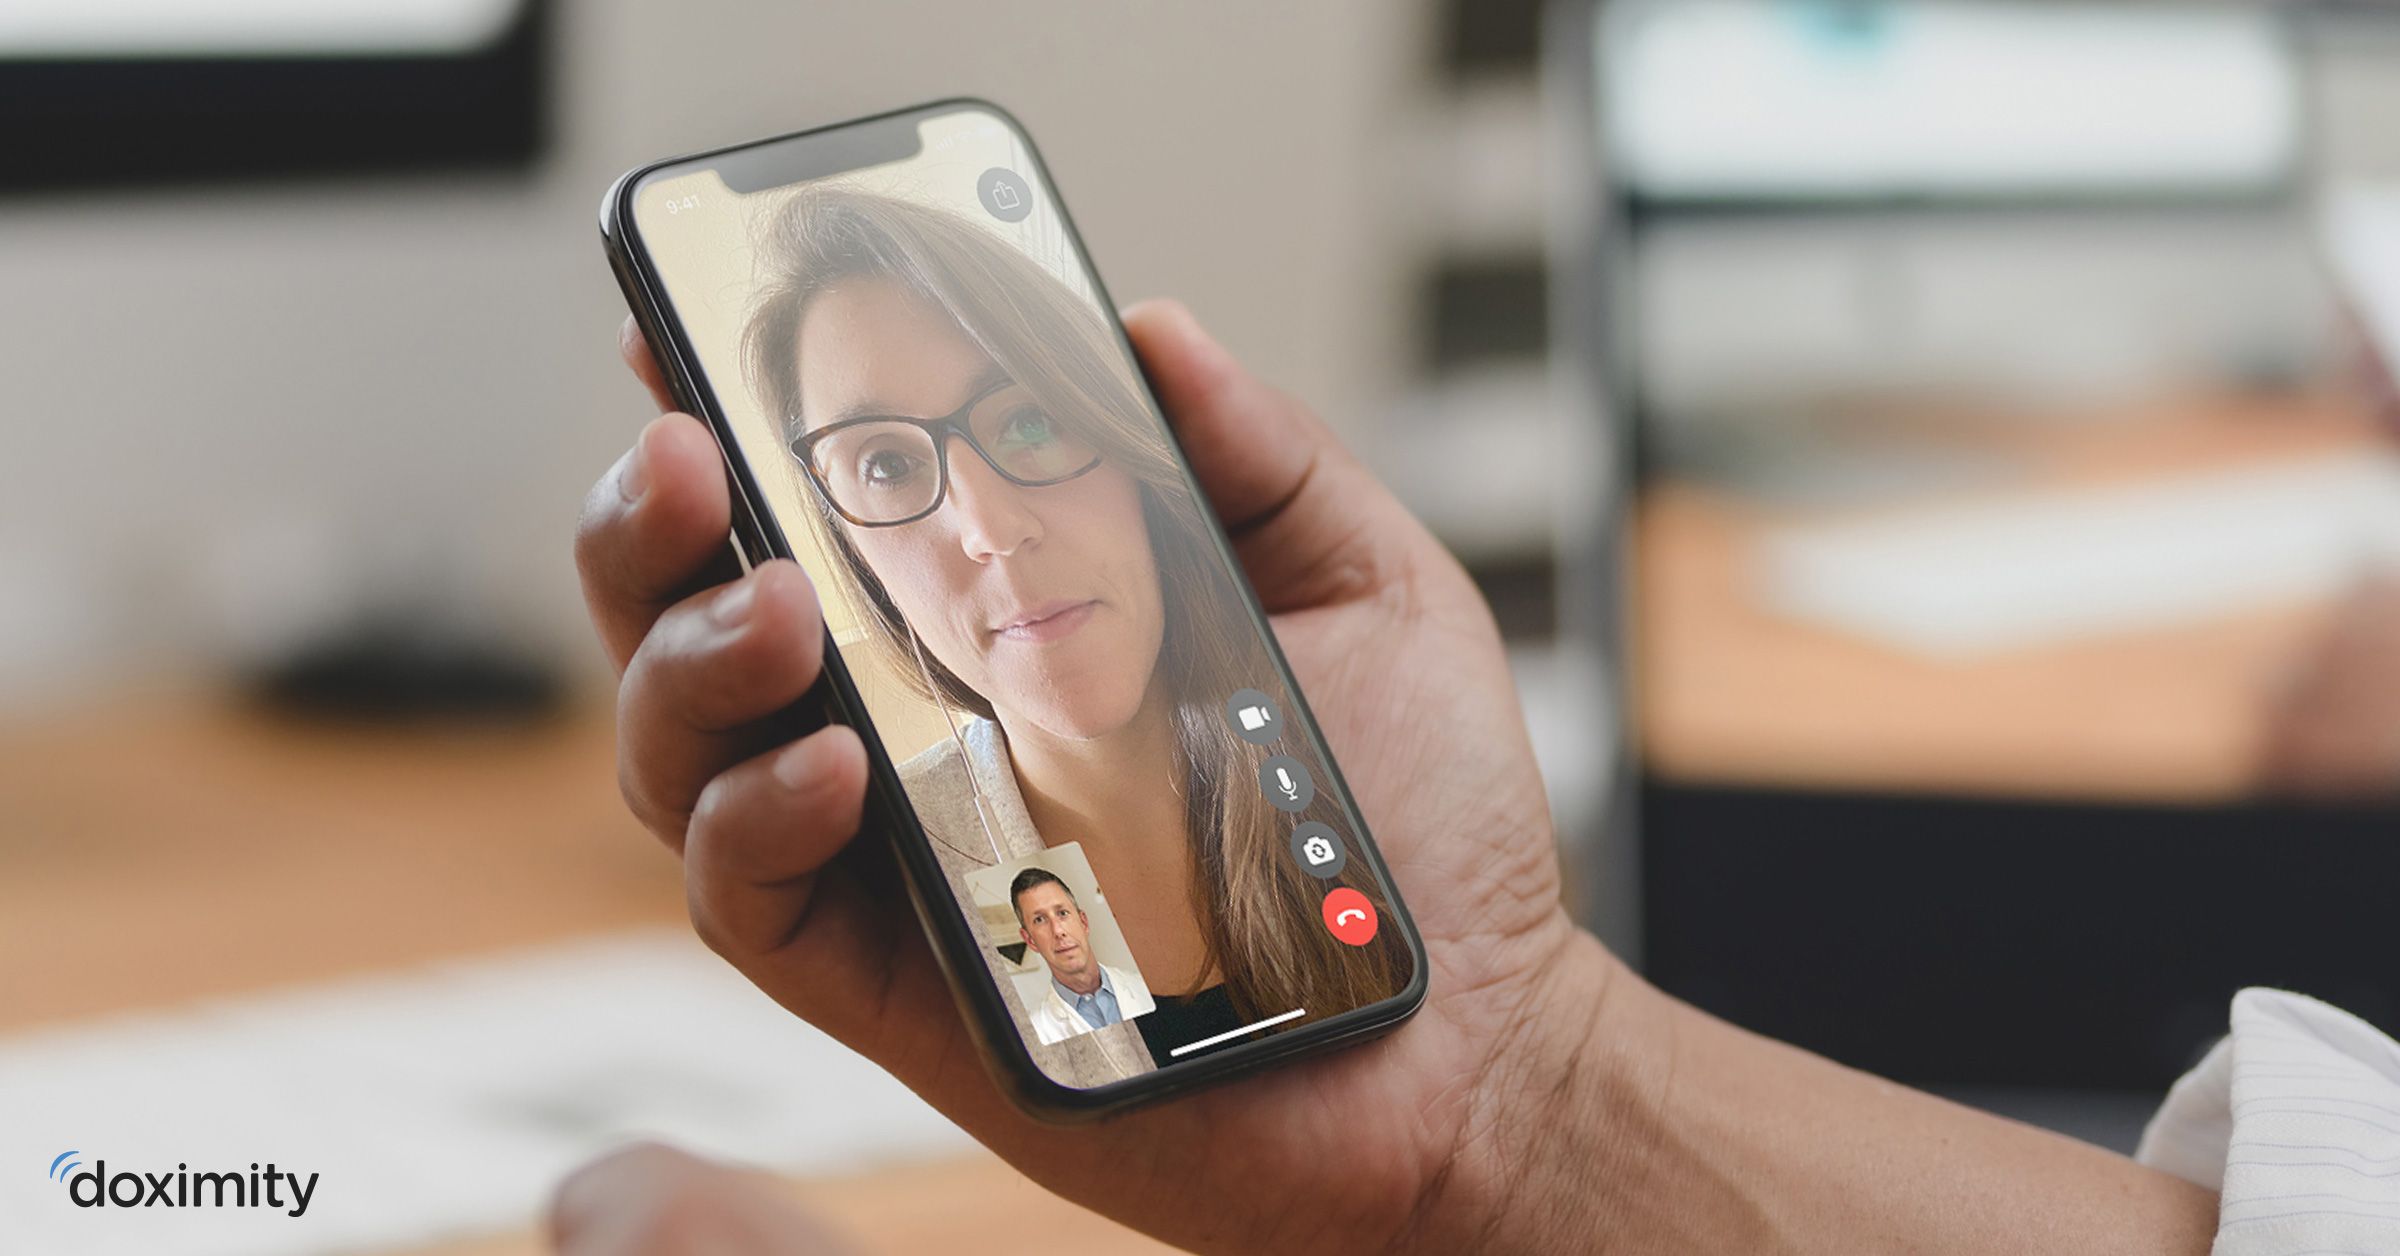 Doximity launches telehealth app for providers